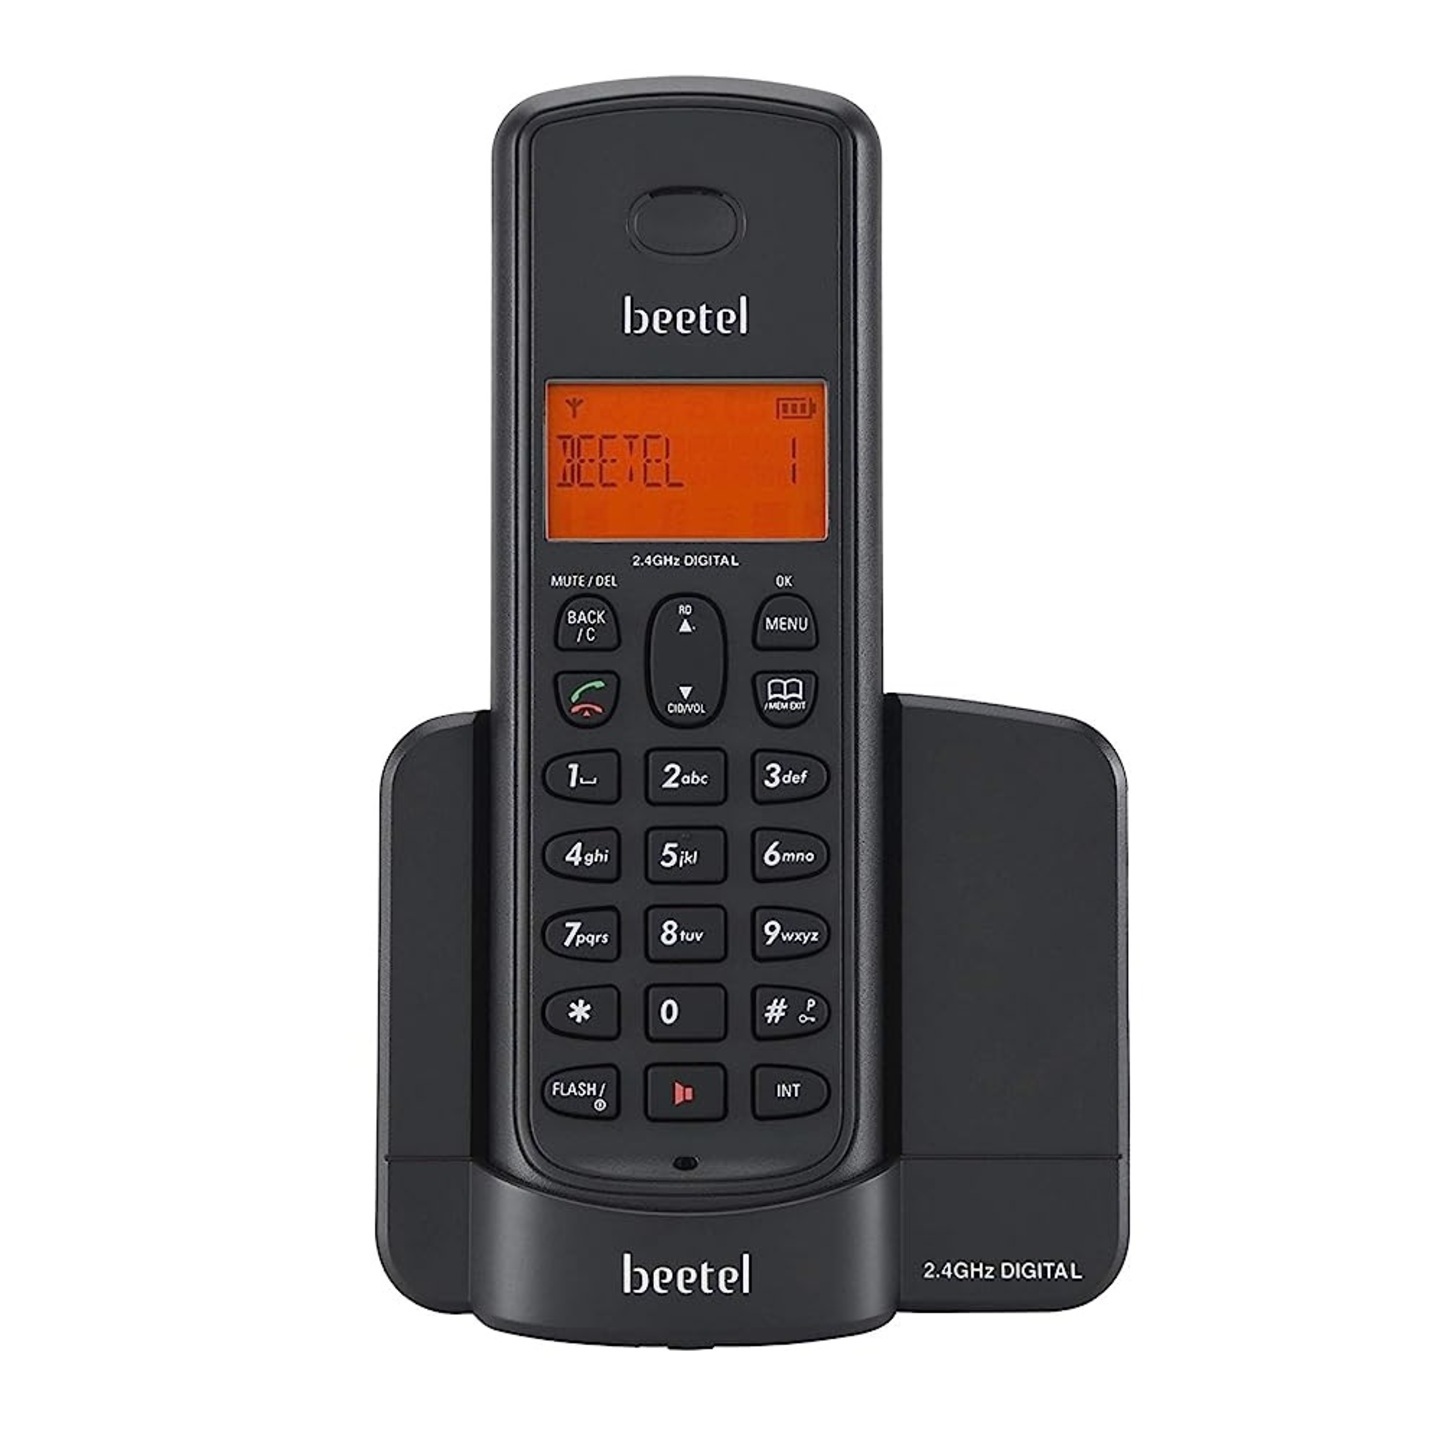 Beetel X90 2.4Ghz Cordless Landline with Alarm, Auto Answer, Display and 8 hours talk time